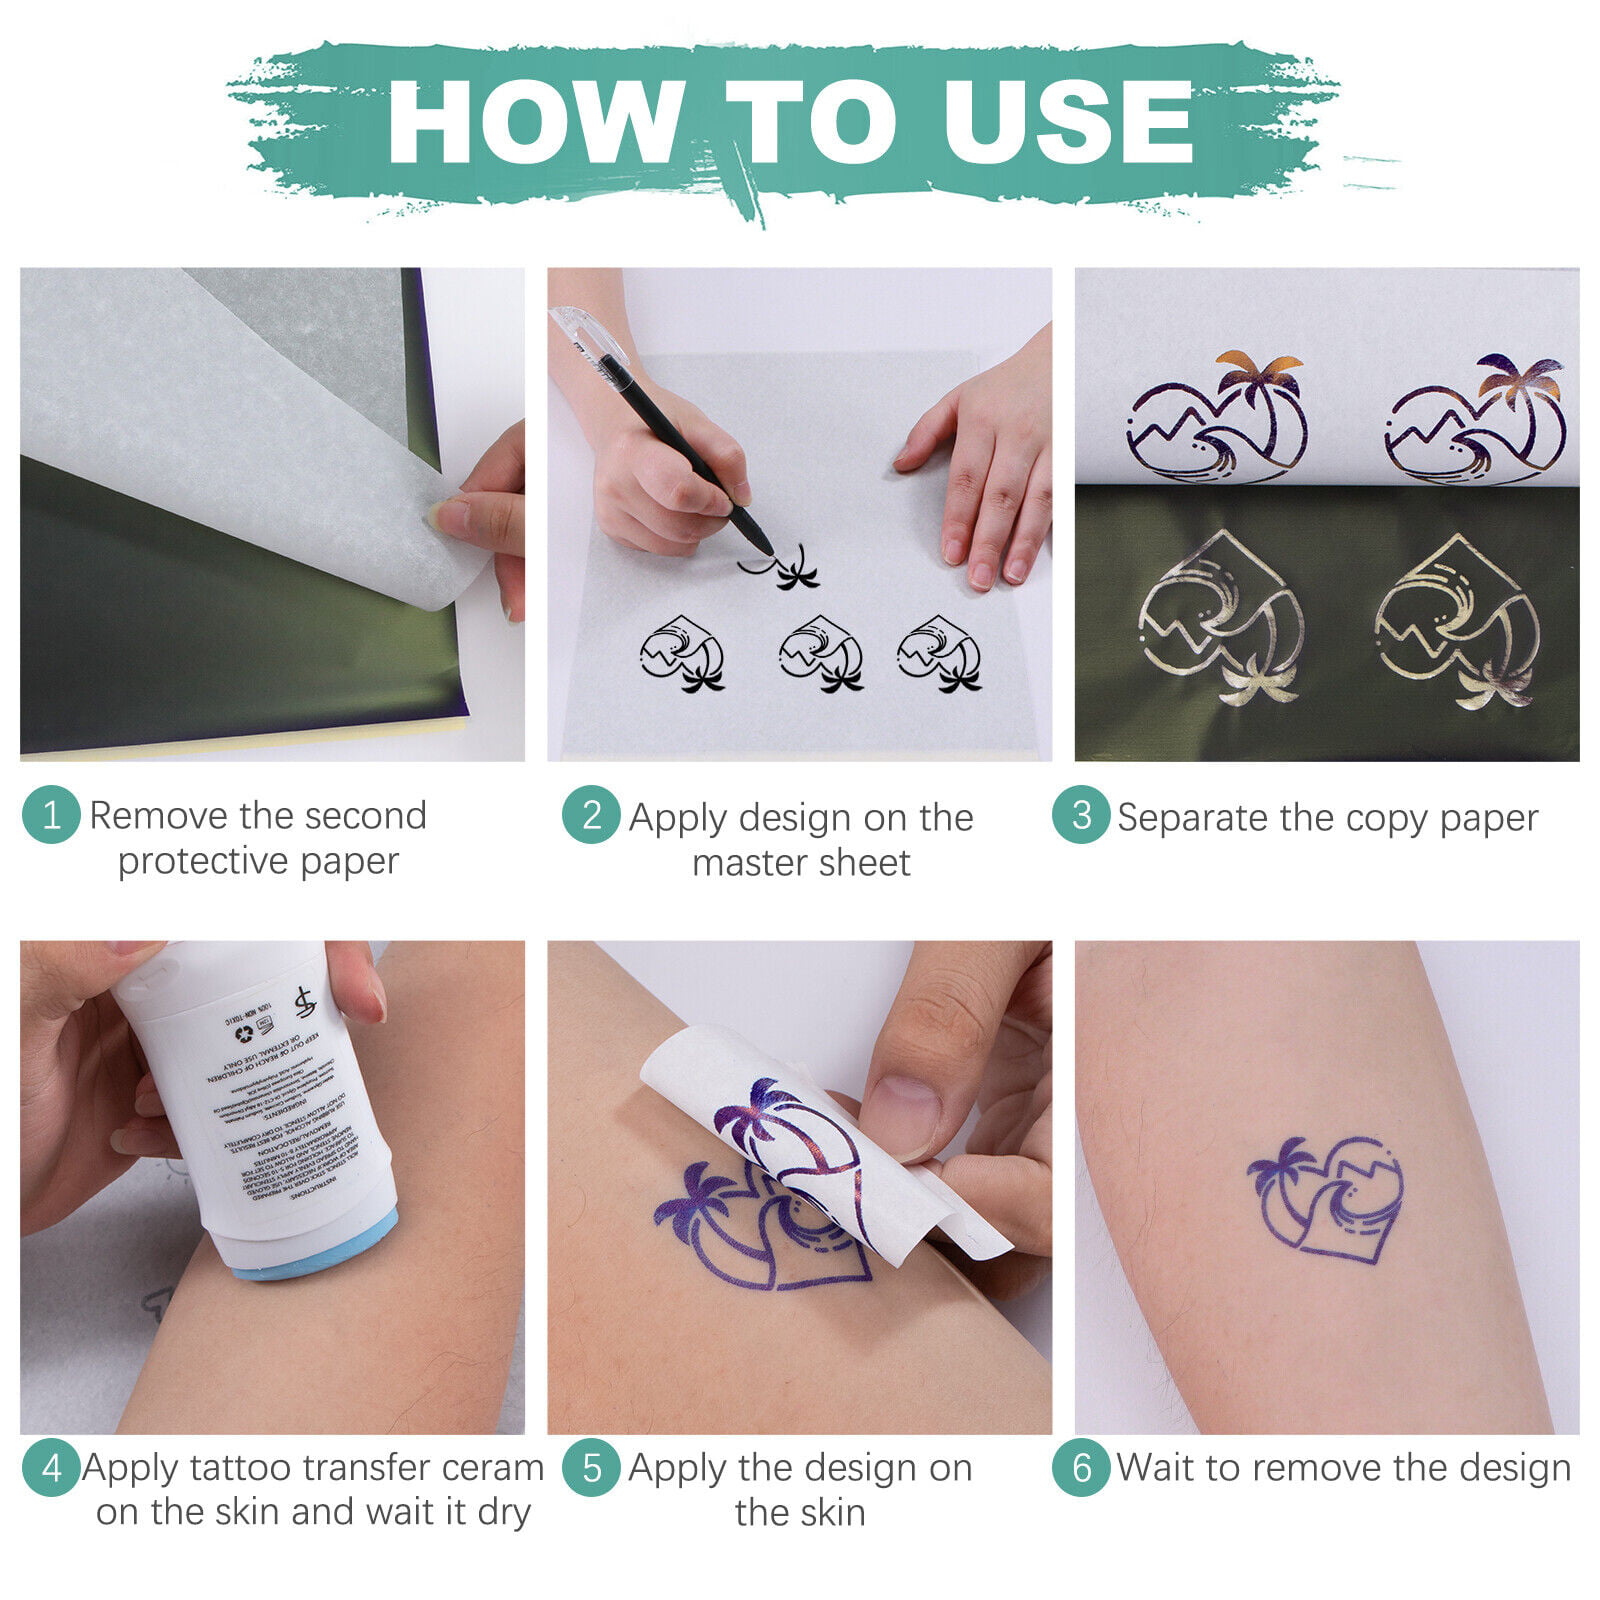 How to use a carbon stencil - Stick and Poke Tattoo Kit